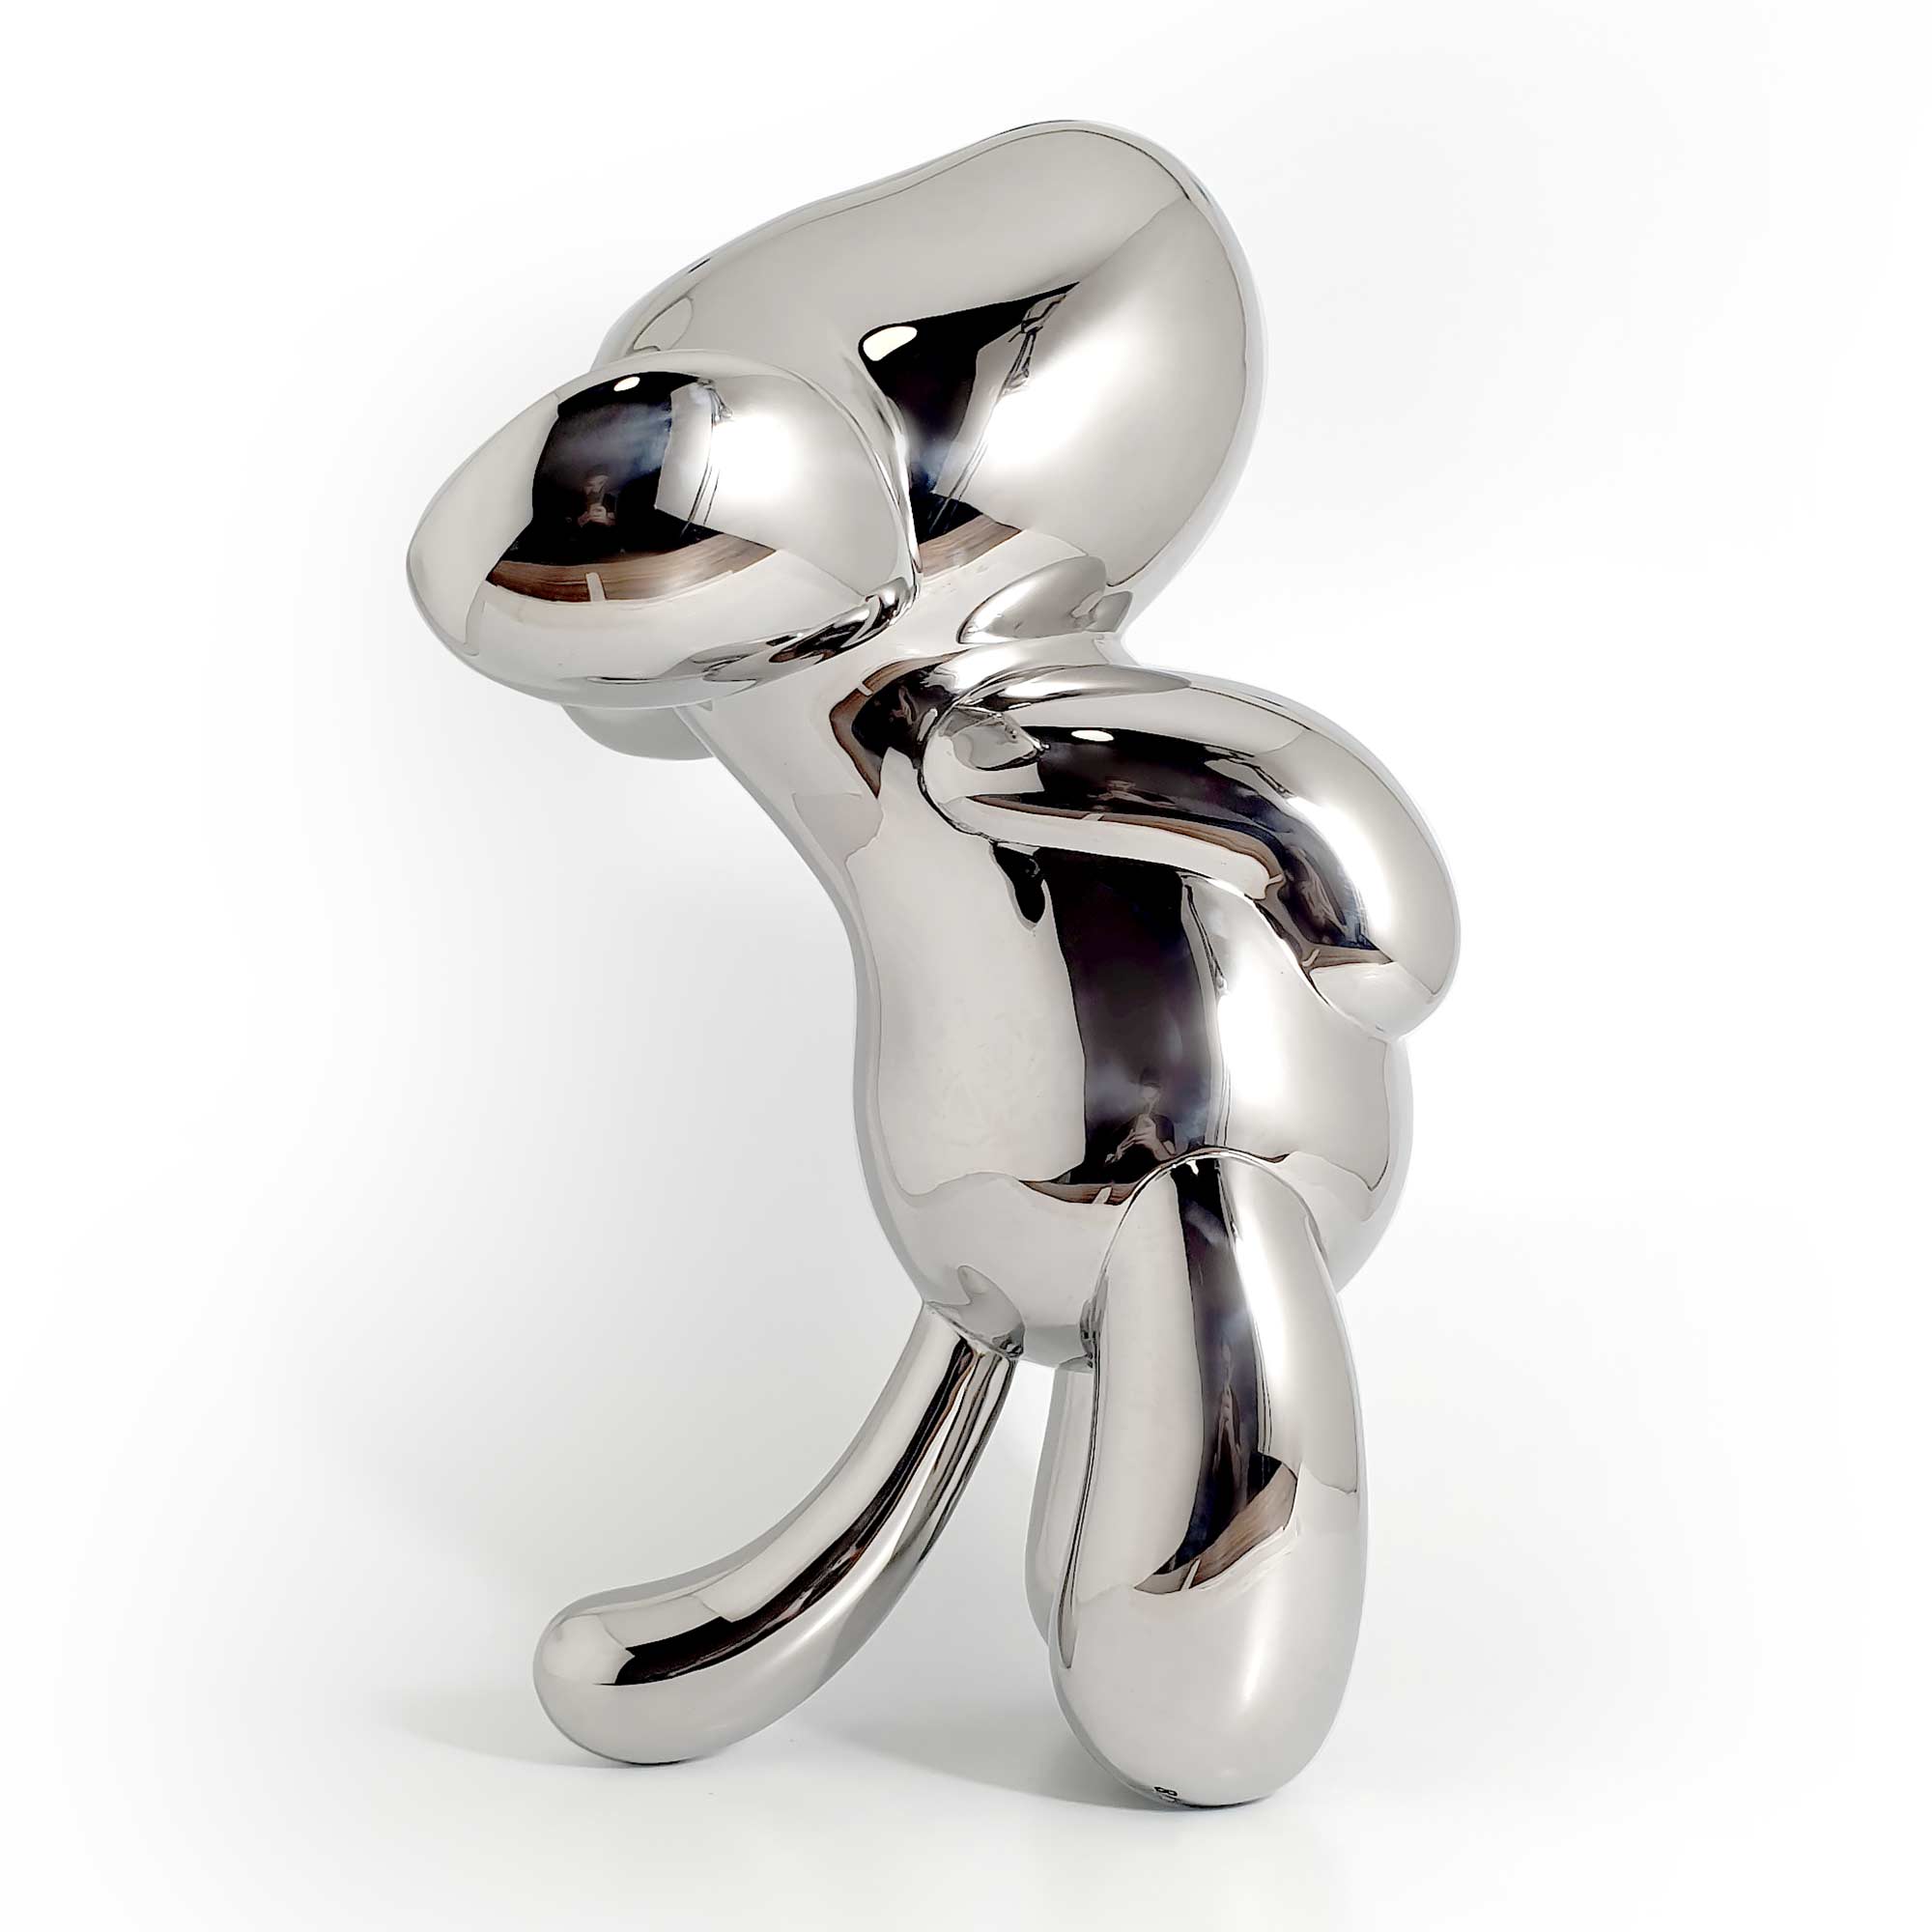 Up and up, dog sculpture, Mirror Polished Stainless Steel Sculpture, by artist Ferdi B Dick, side view